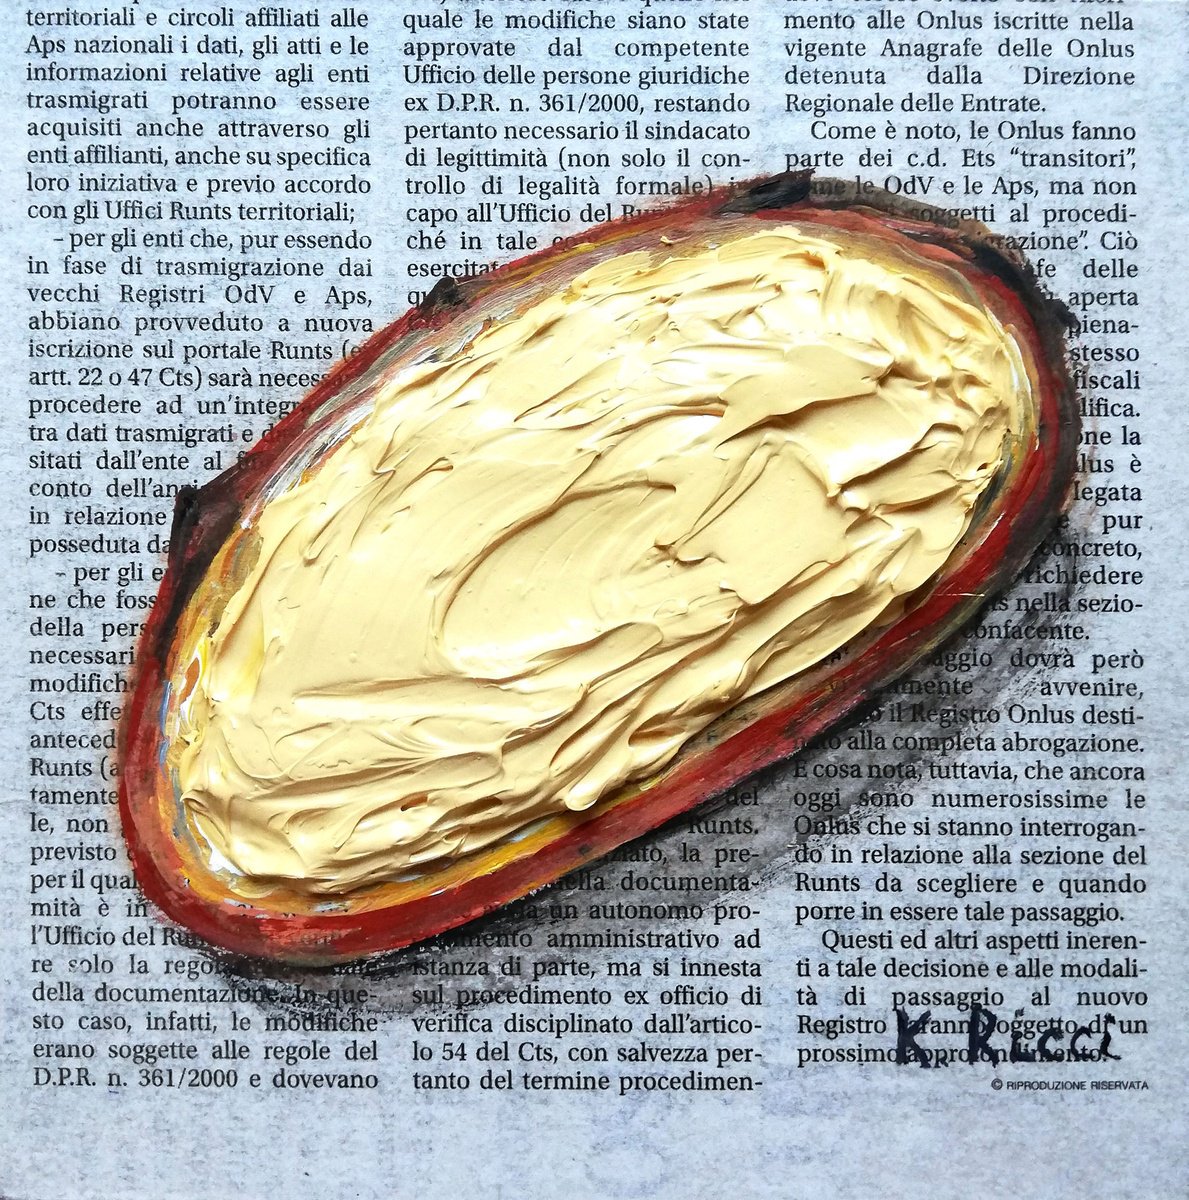 Bread with Peanut Butter on Newspaper Original Acrylic on Canvas Board Painting 6 by 6 i... by Katia Ricci